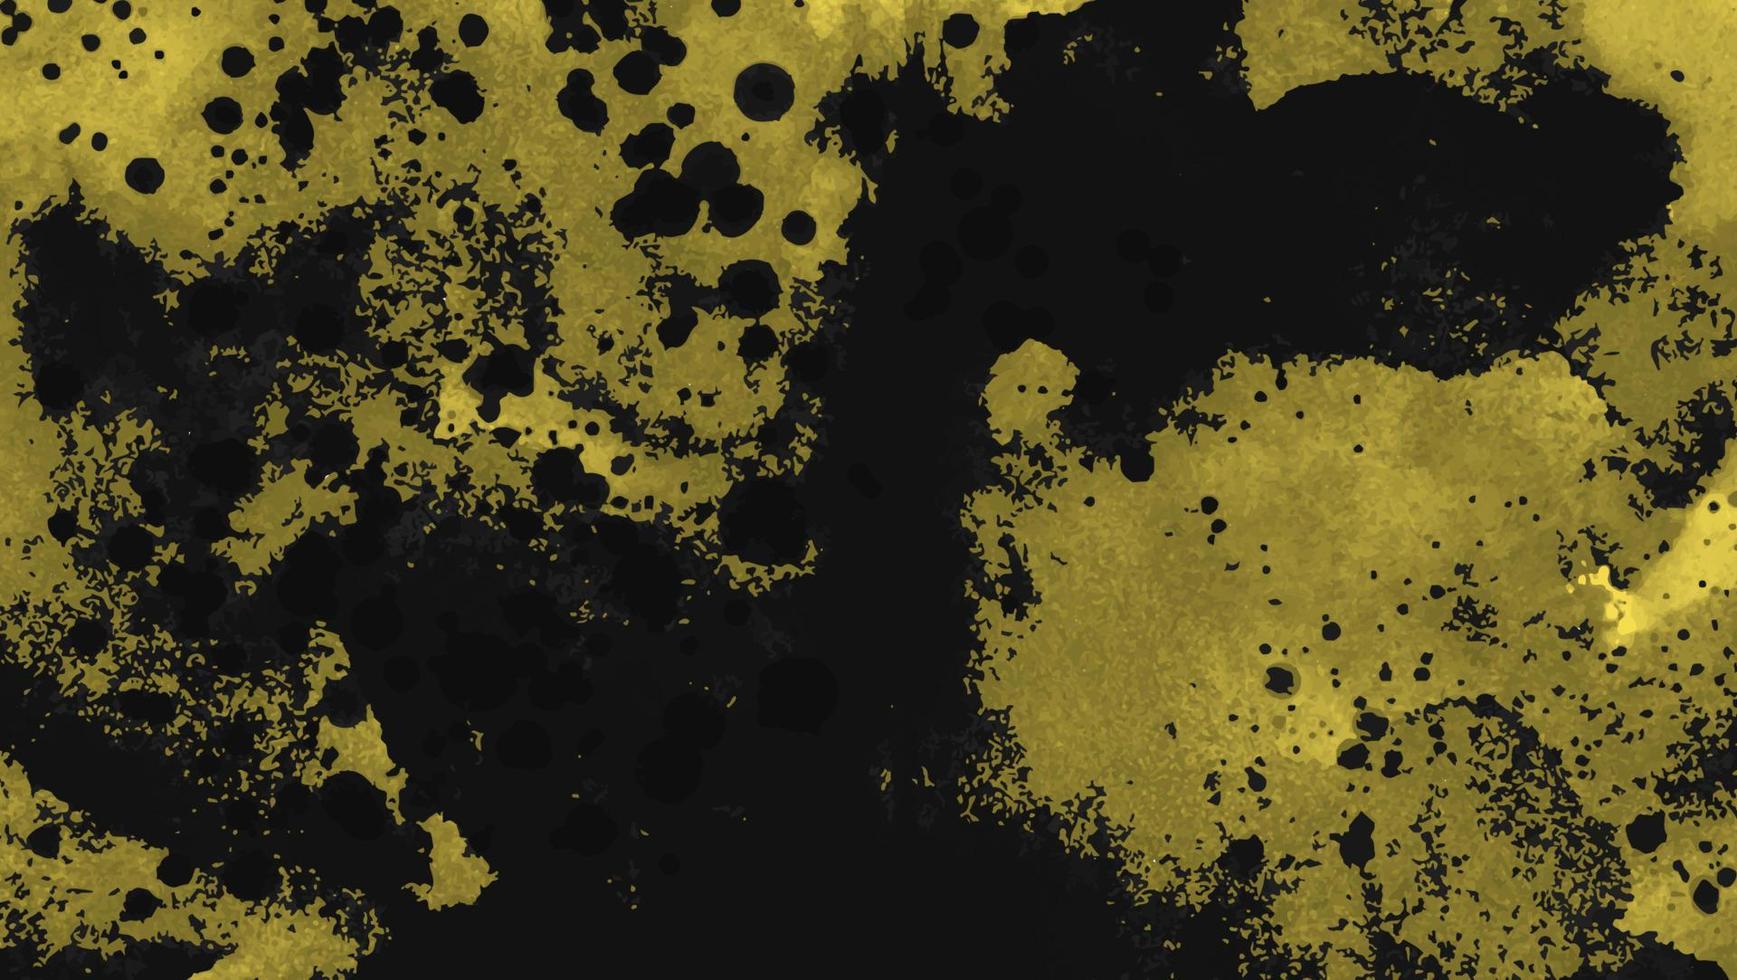 Gold Marbling Texture design for poster, brochure, invitation, cover book, catalog. Luxury abstract background alcohol ink technique black and gold vector